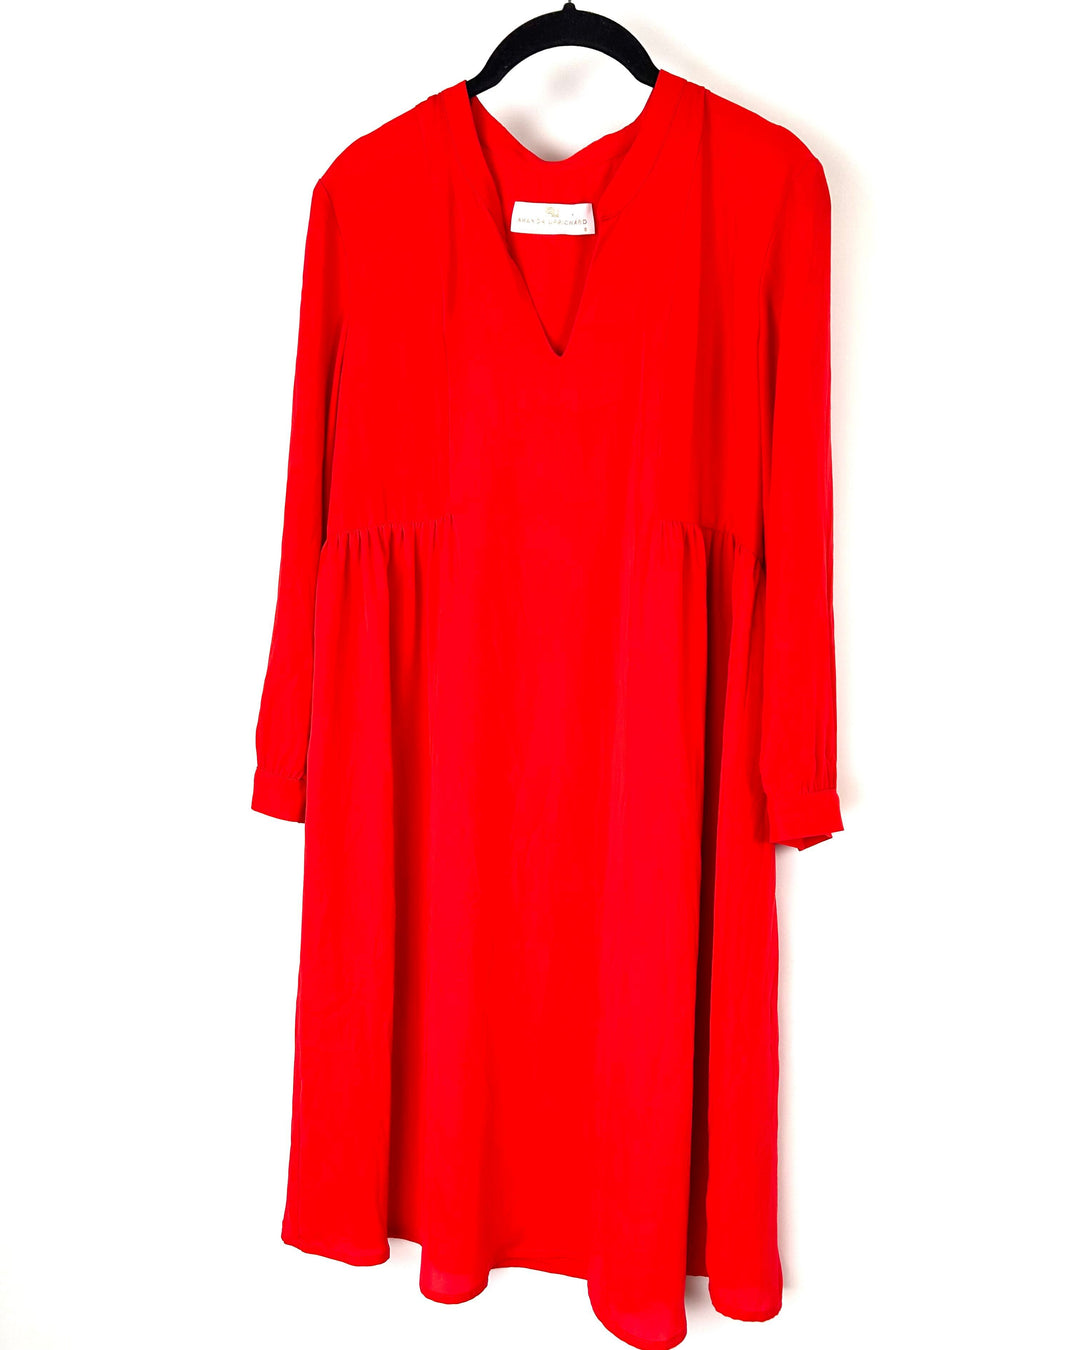 Red Long Sleeve Dress - Size 6-8